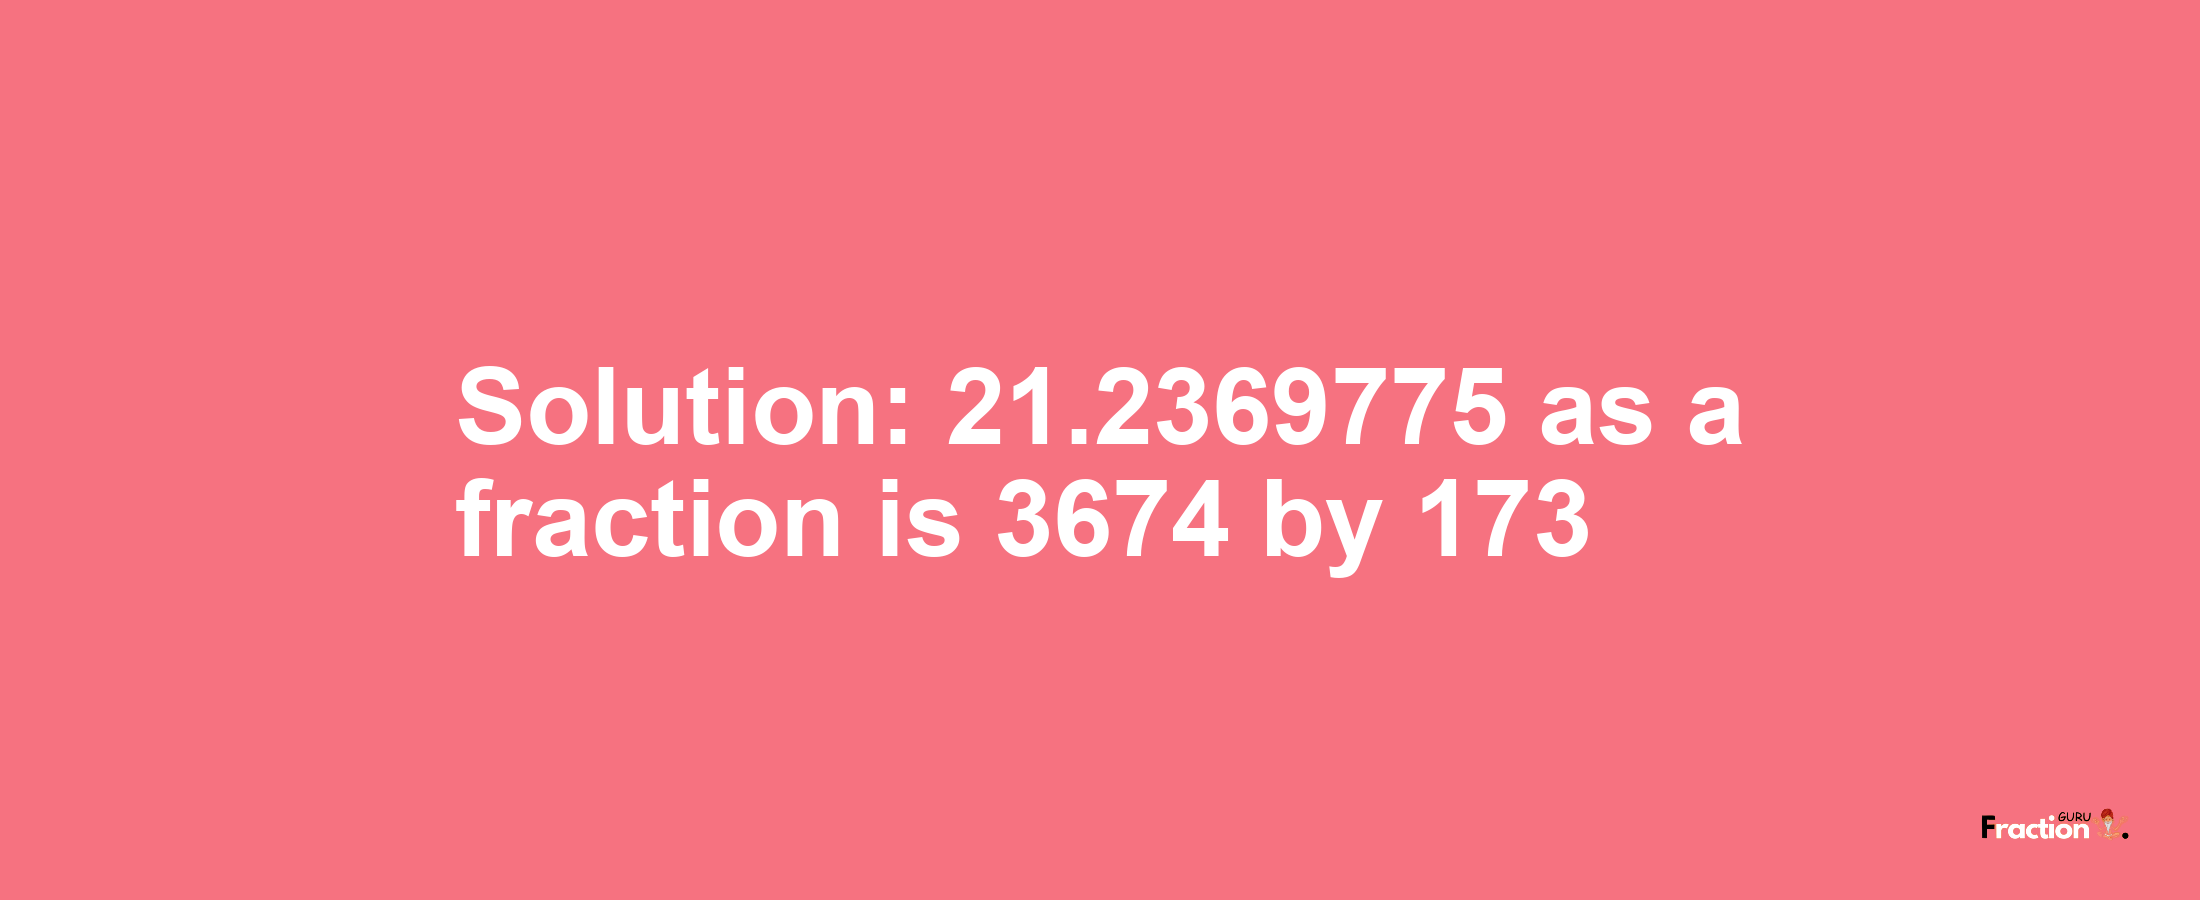 Solution:21.2369775 as a fraction is 3674/173